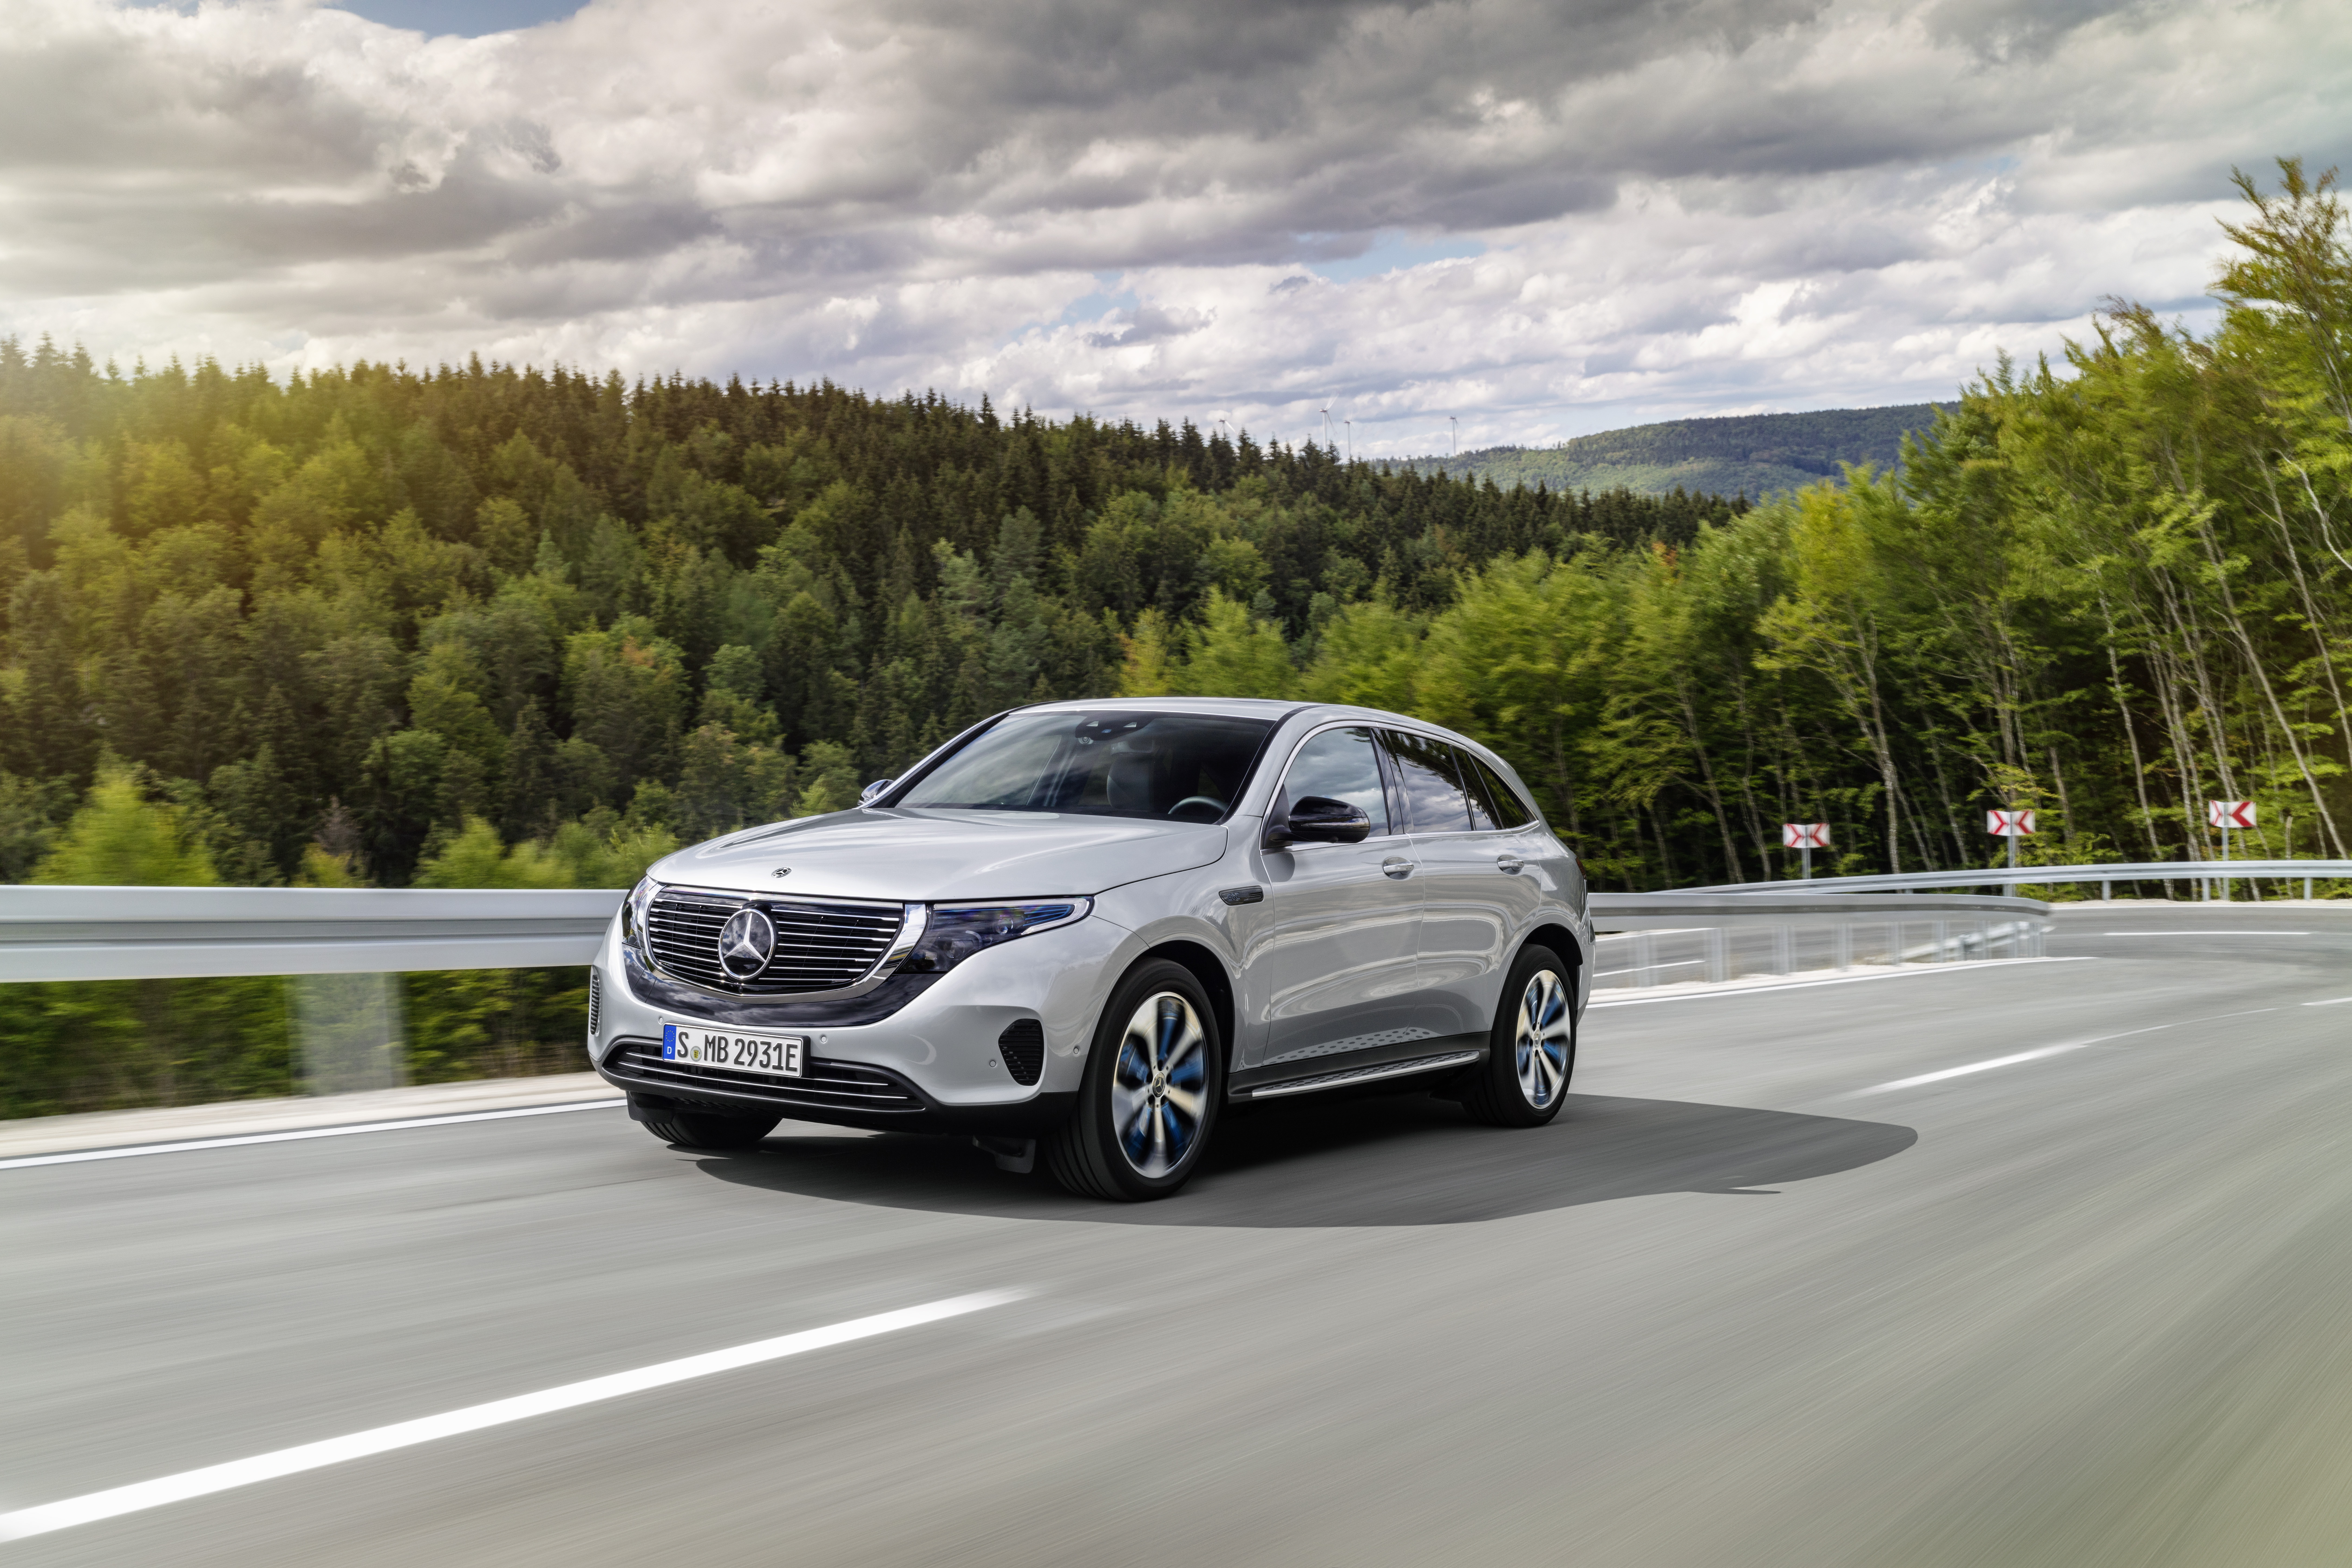 Mercedes Reveals All-Electric EQC Crossover